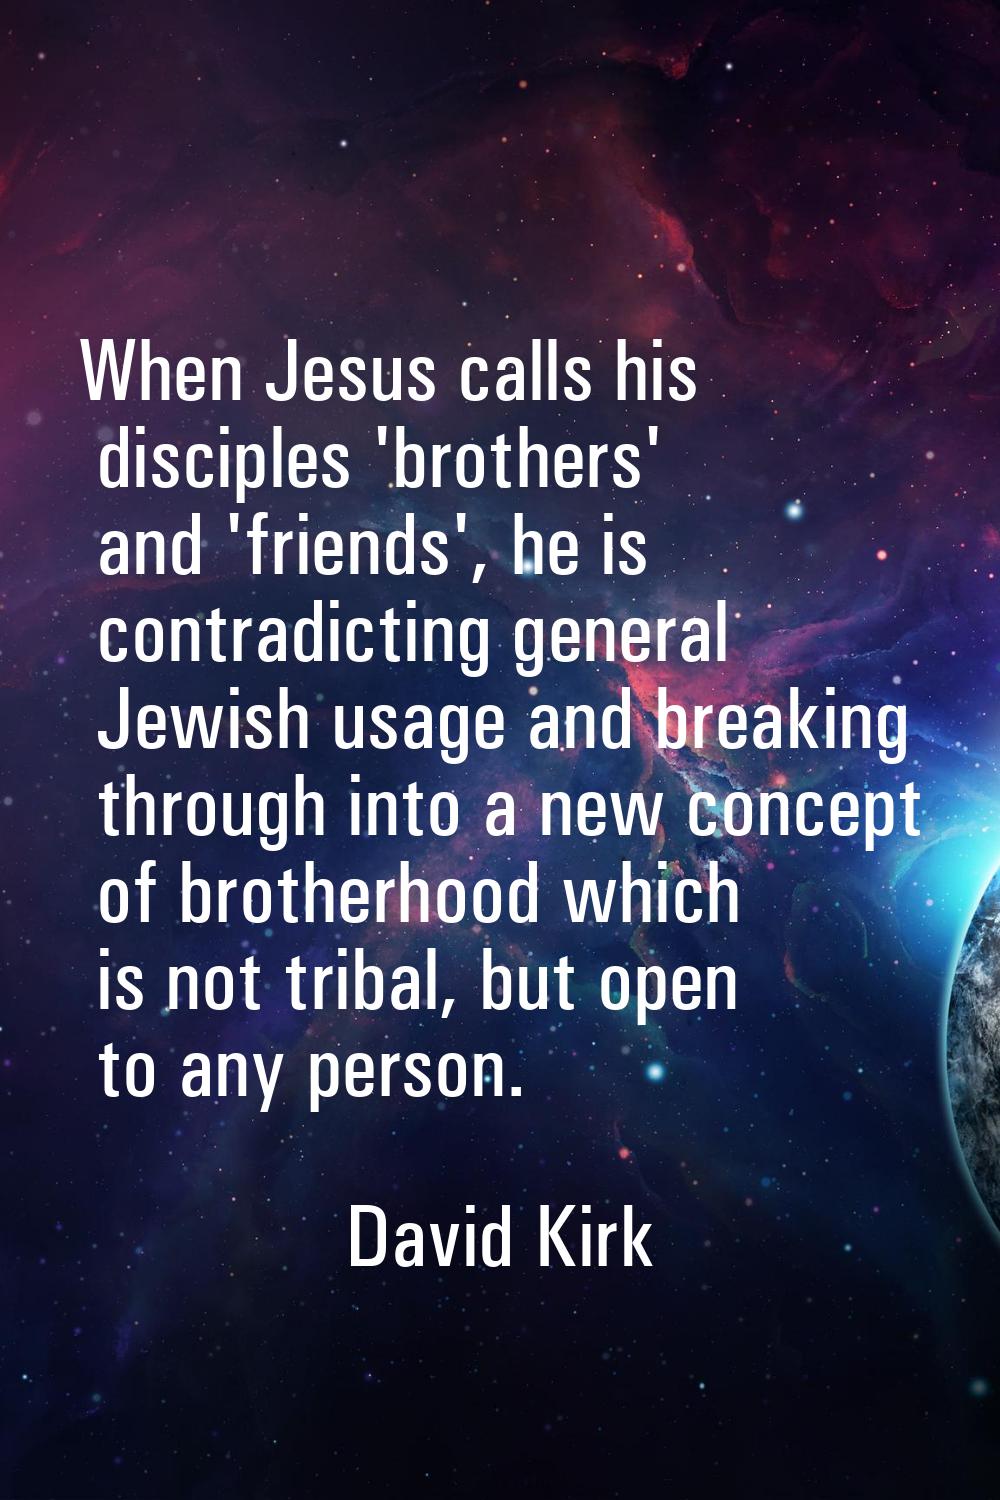 When Jesus calls his disciples 'brothers' and 'friends', he is contradicting general Jewish usage a